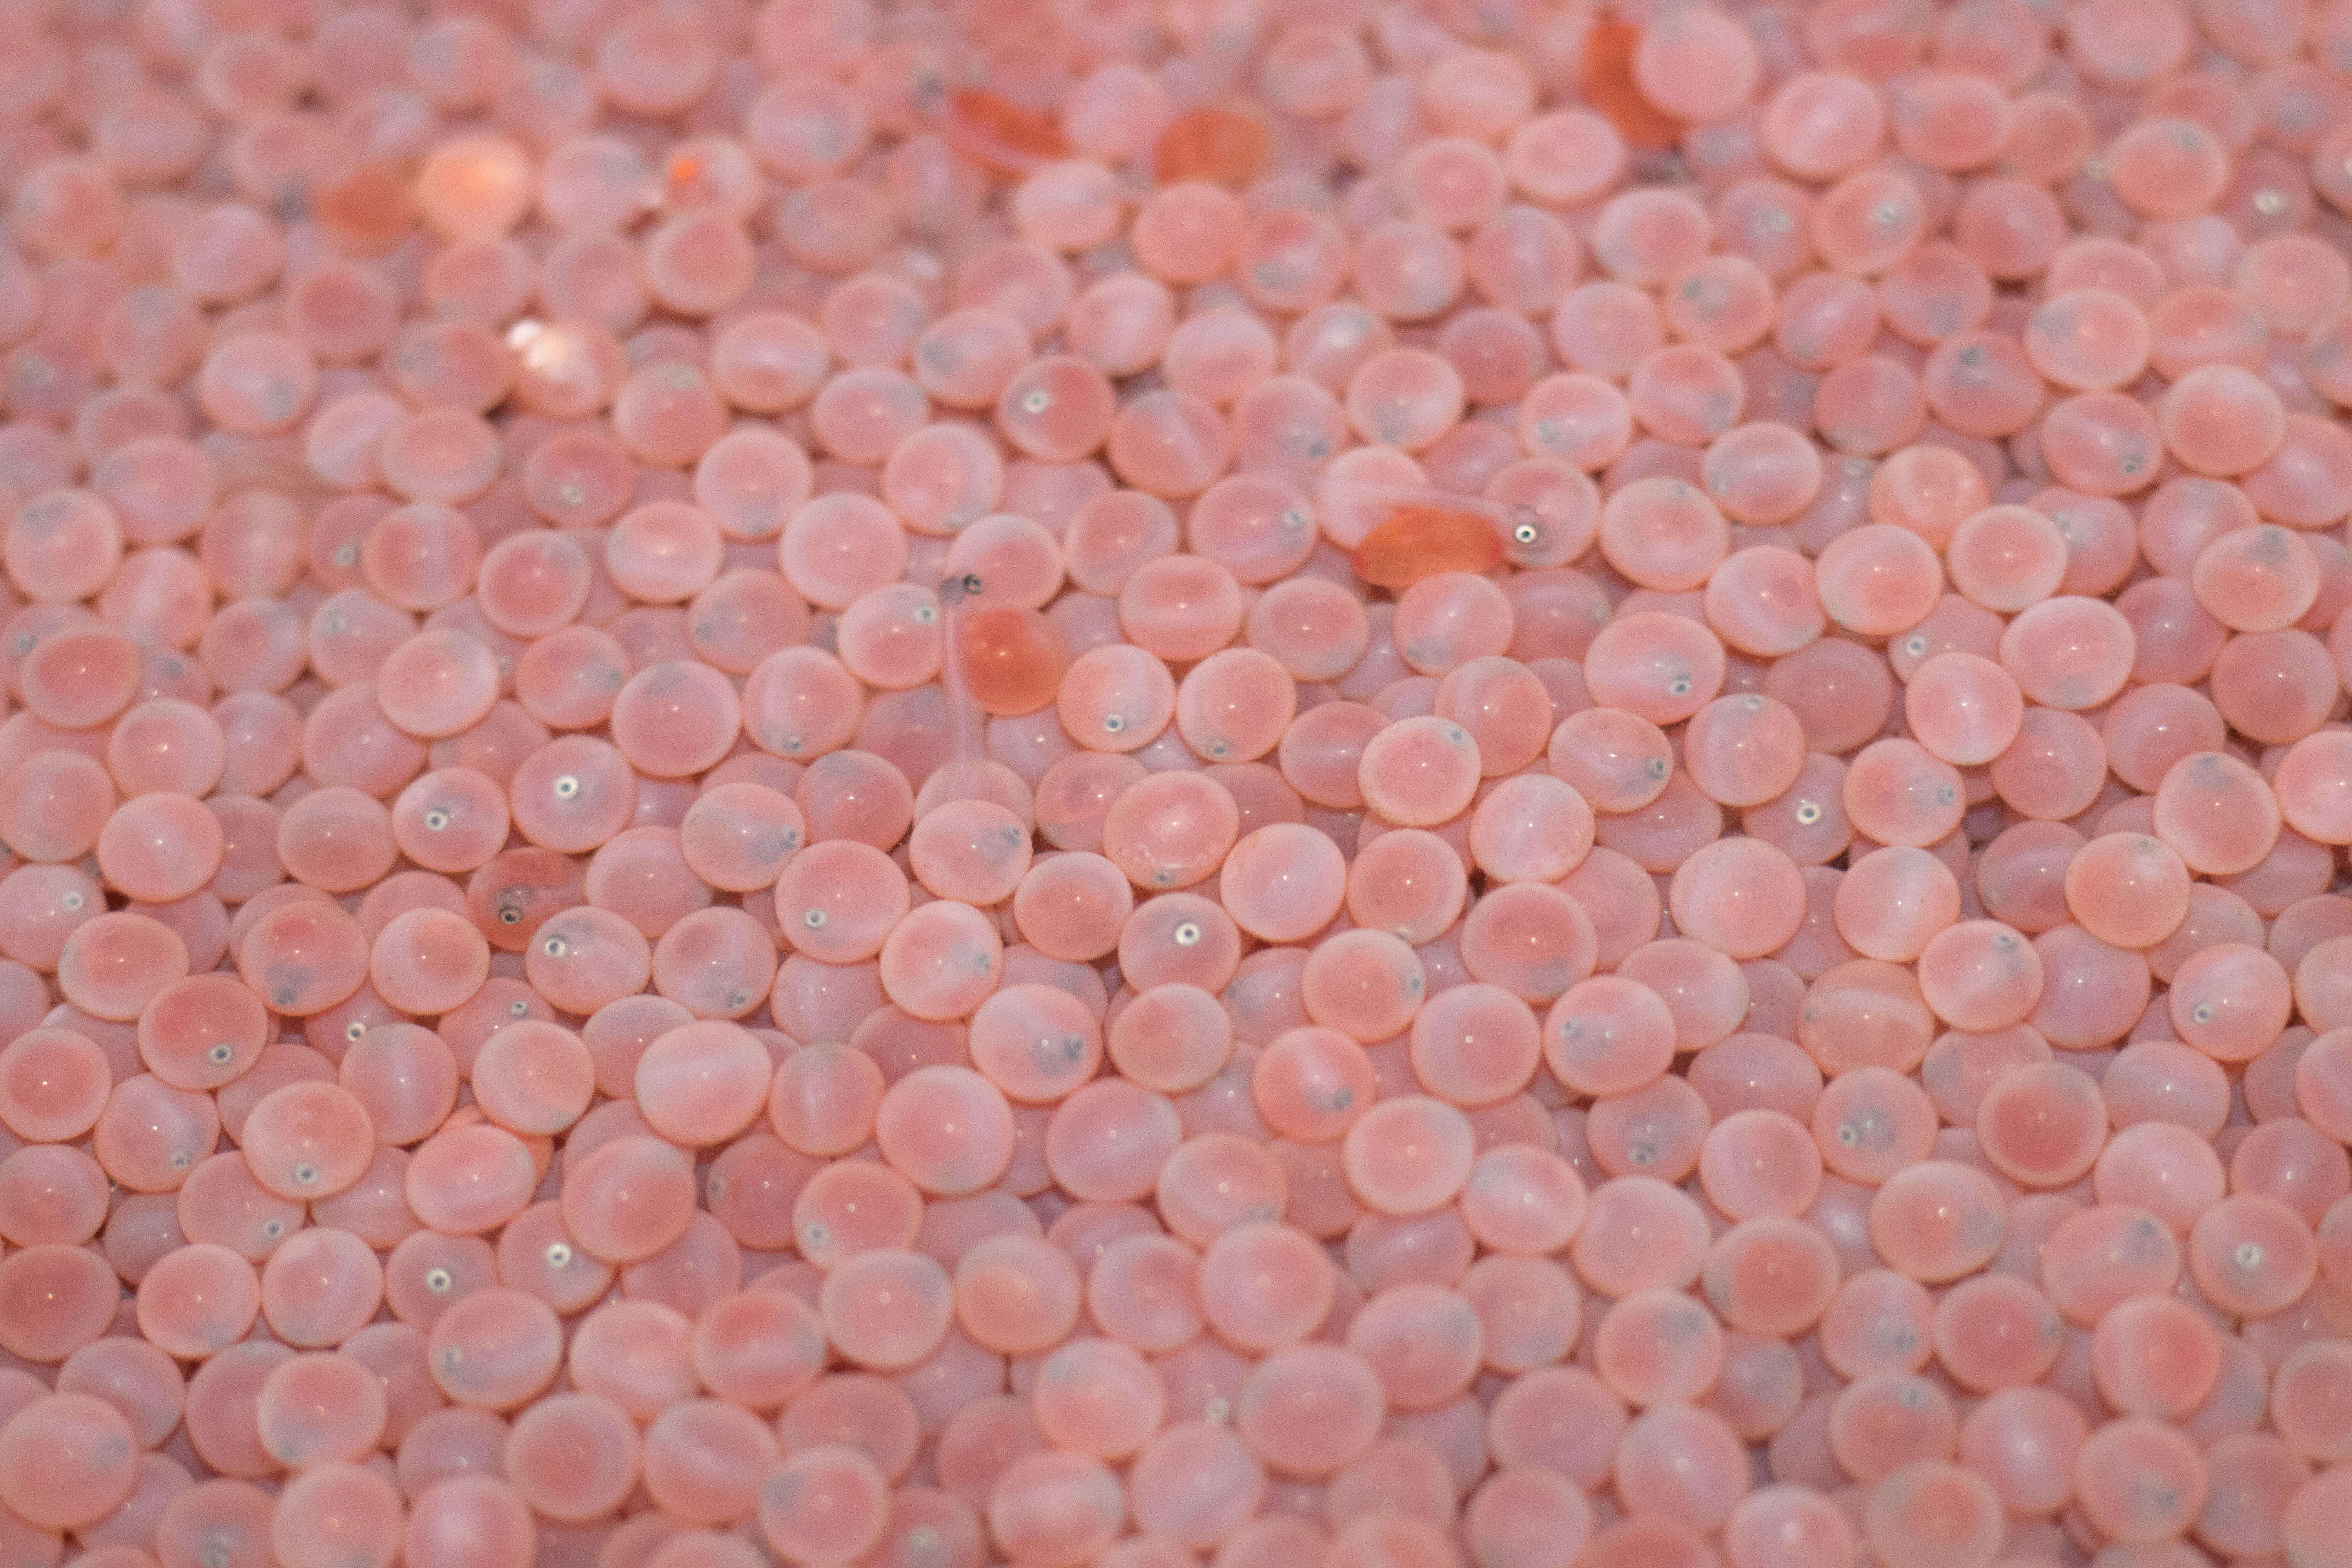 Chinook salmon eggs with visible eyes.